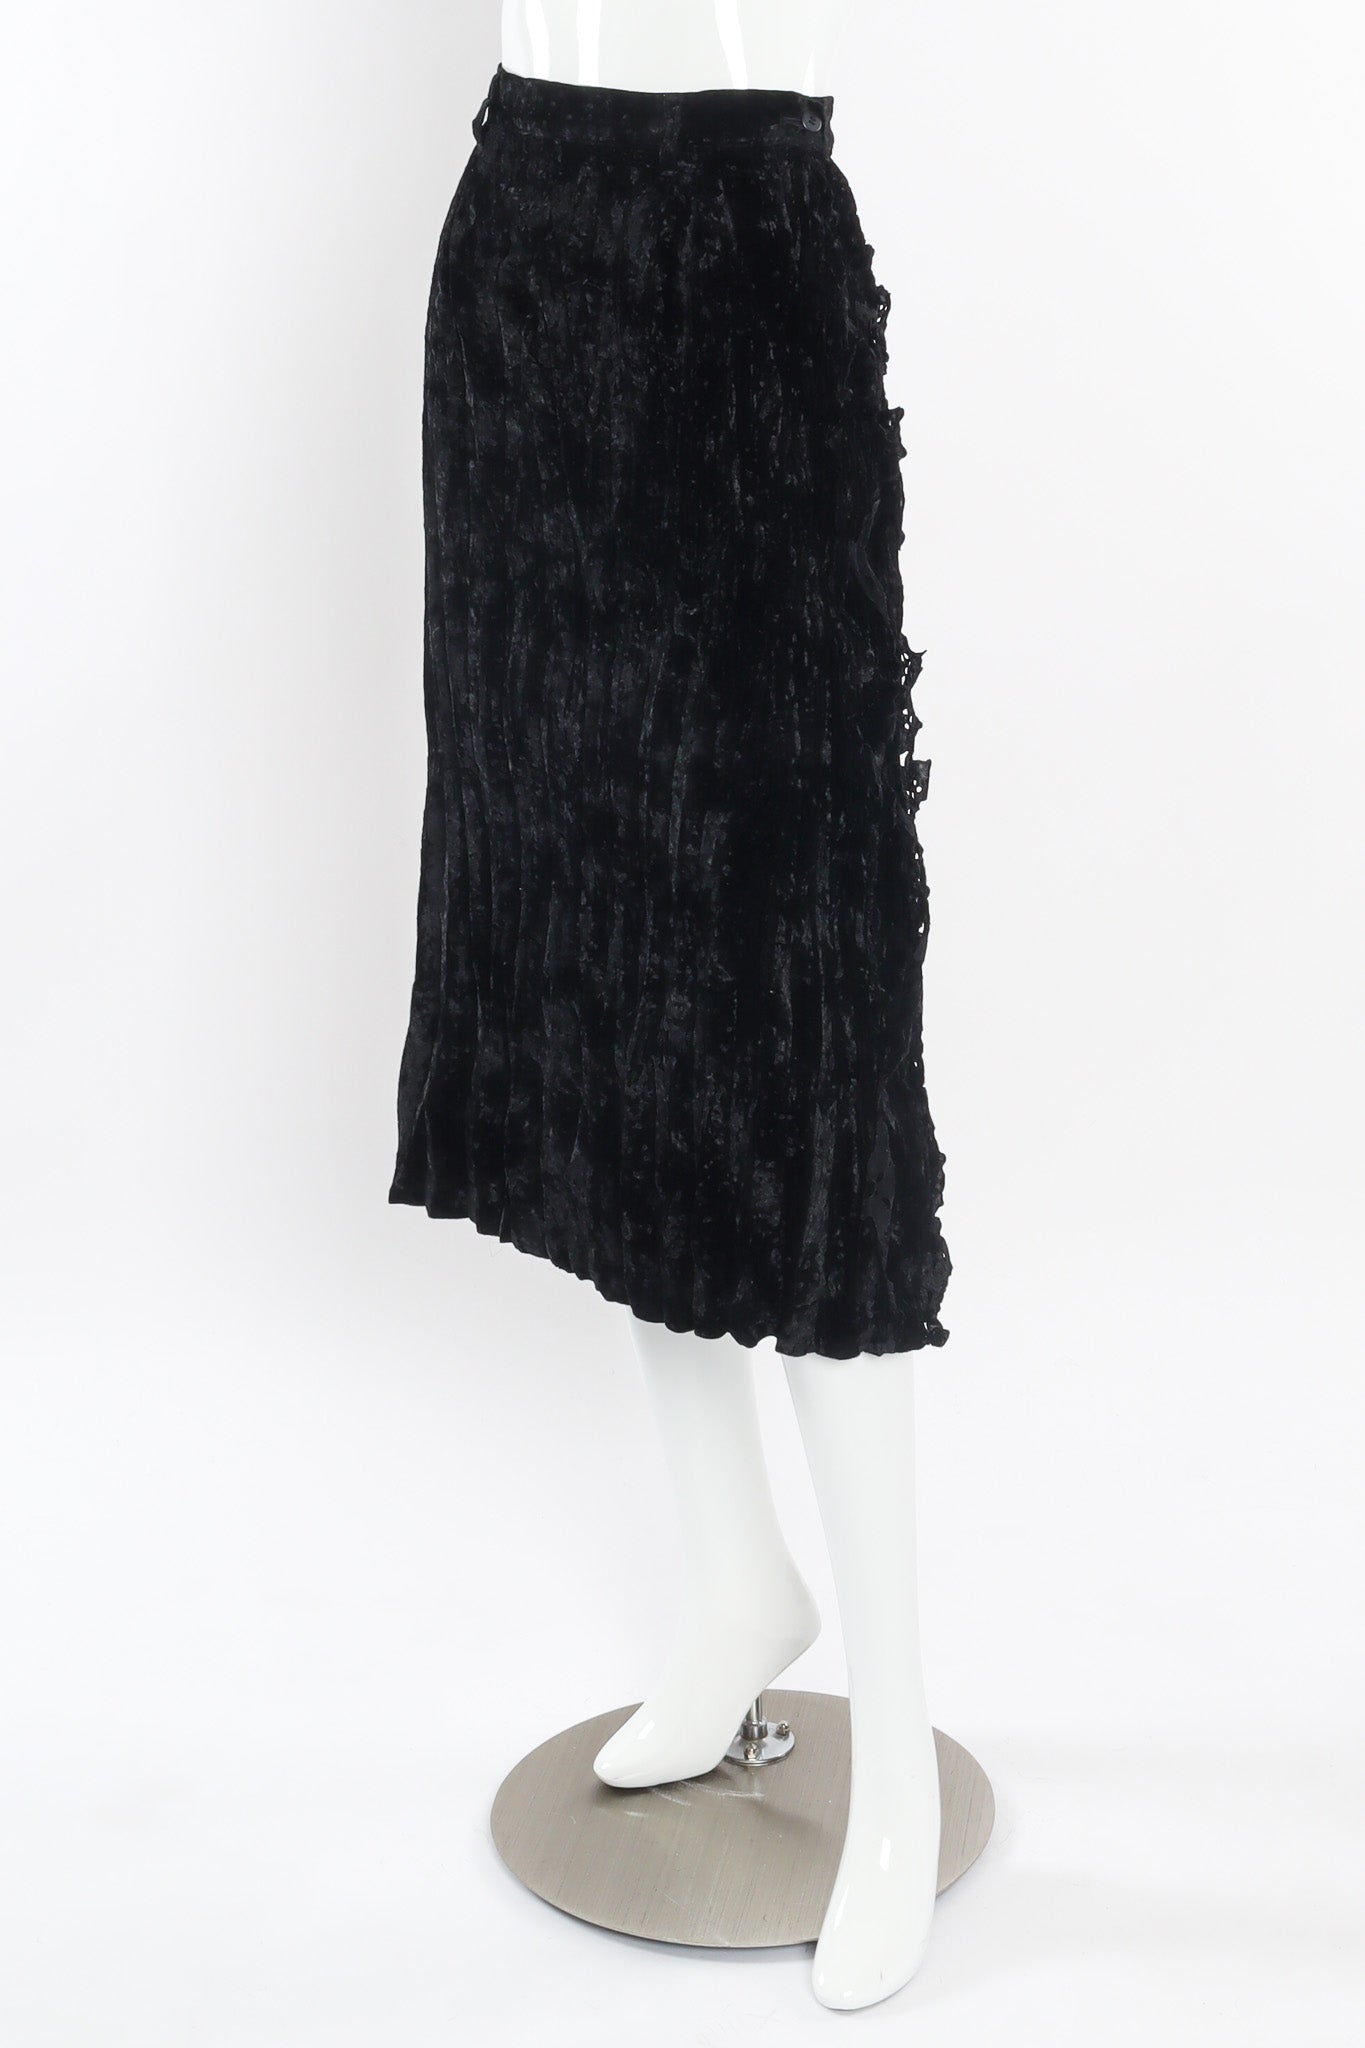 Crushed velvet midi skirt with eyelet lace by Issey Miyake Féte quarter view photo @recessla